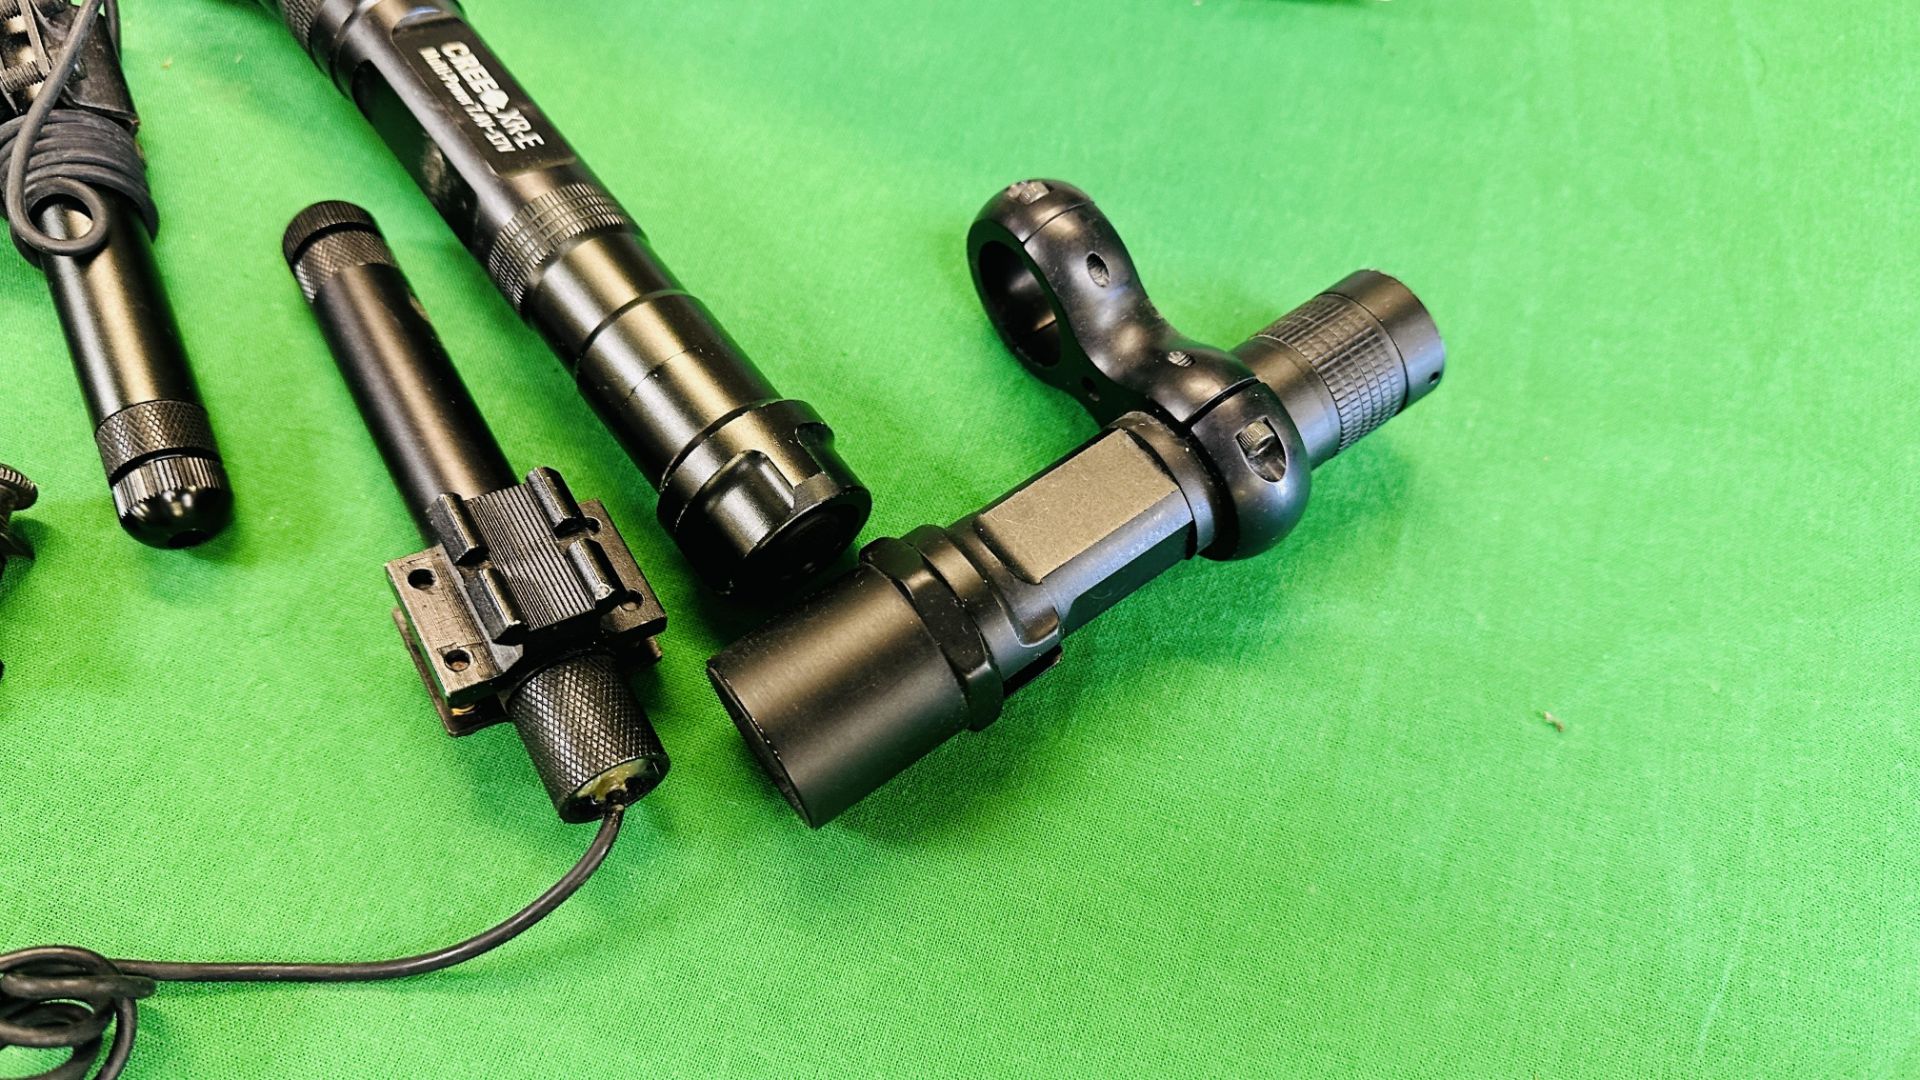 A GROUP OF VARIOUS TORCHES TO INCLUDE CLULITE CREE, ULTRAFINE ALONG WITH VARIOUS MOUNTS. - Image 3 of 8